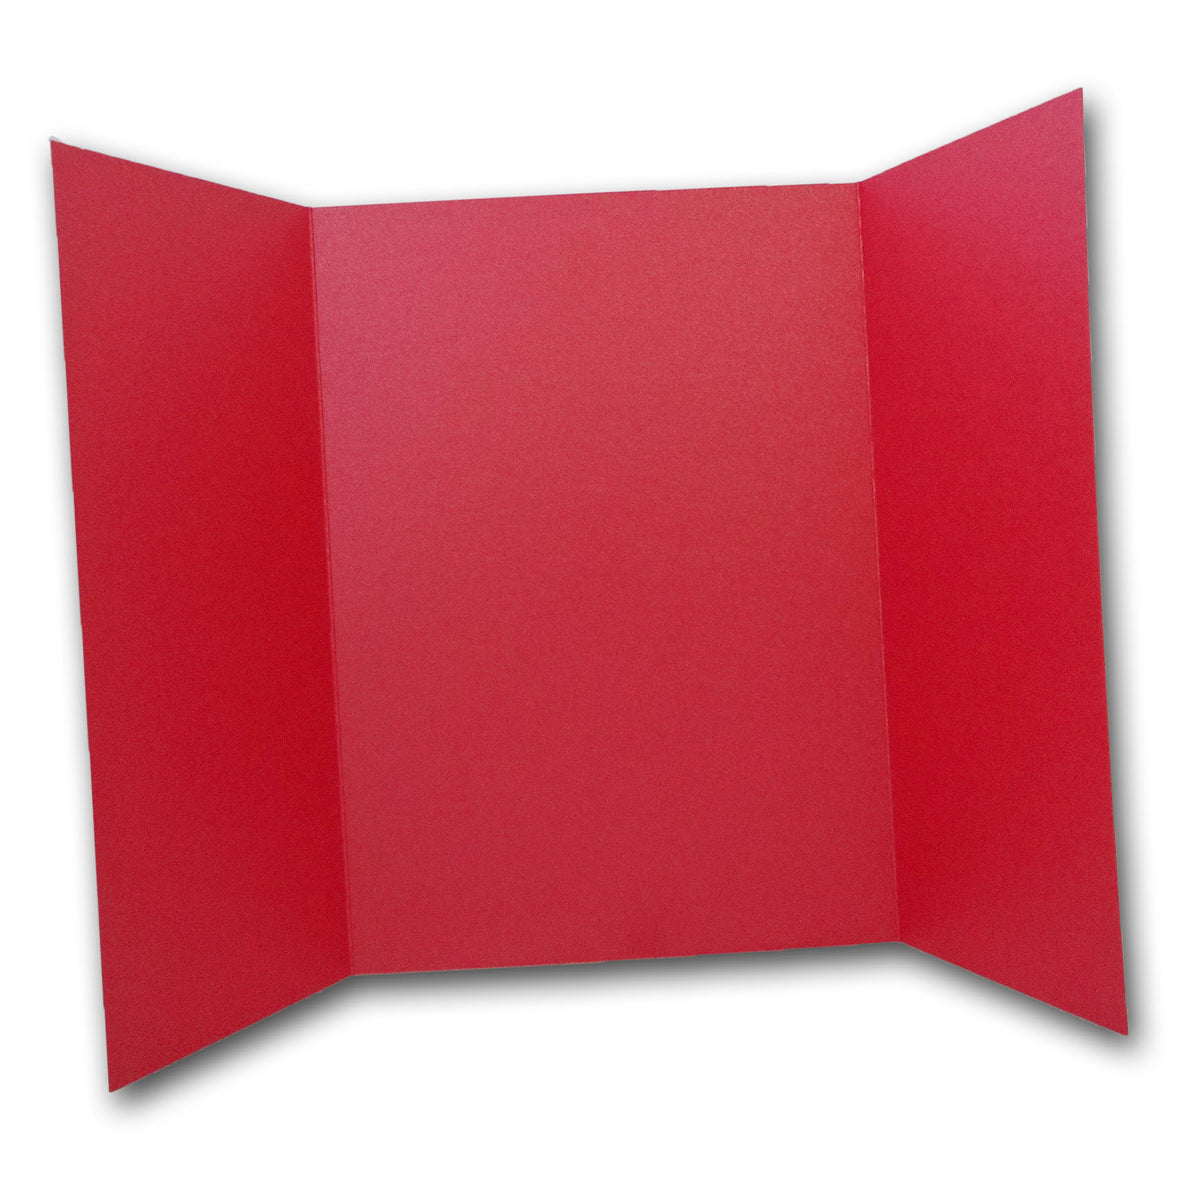 Shimmery Red 5x7 Gatefold Discount Card Stock DIY Invitations